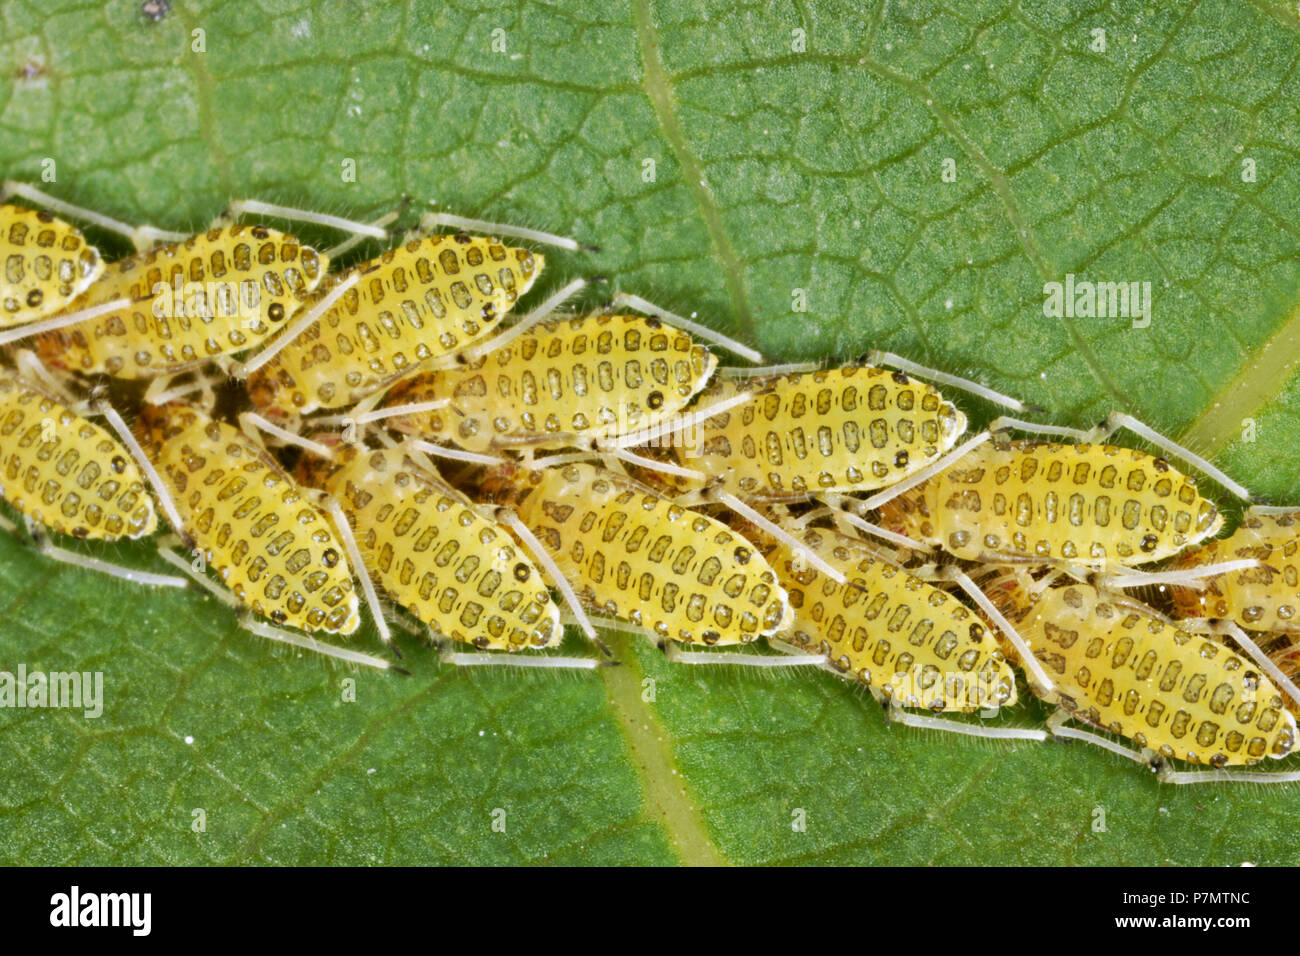 Group of Large Walnut Aphid (Panaphis juglandis) on the leaf of walmut Stock Photo